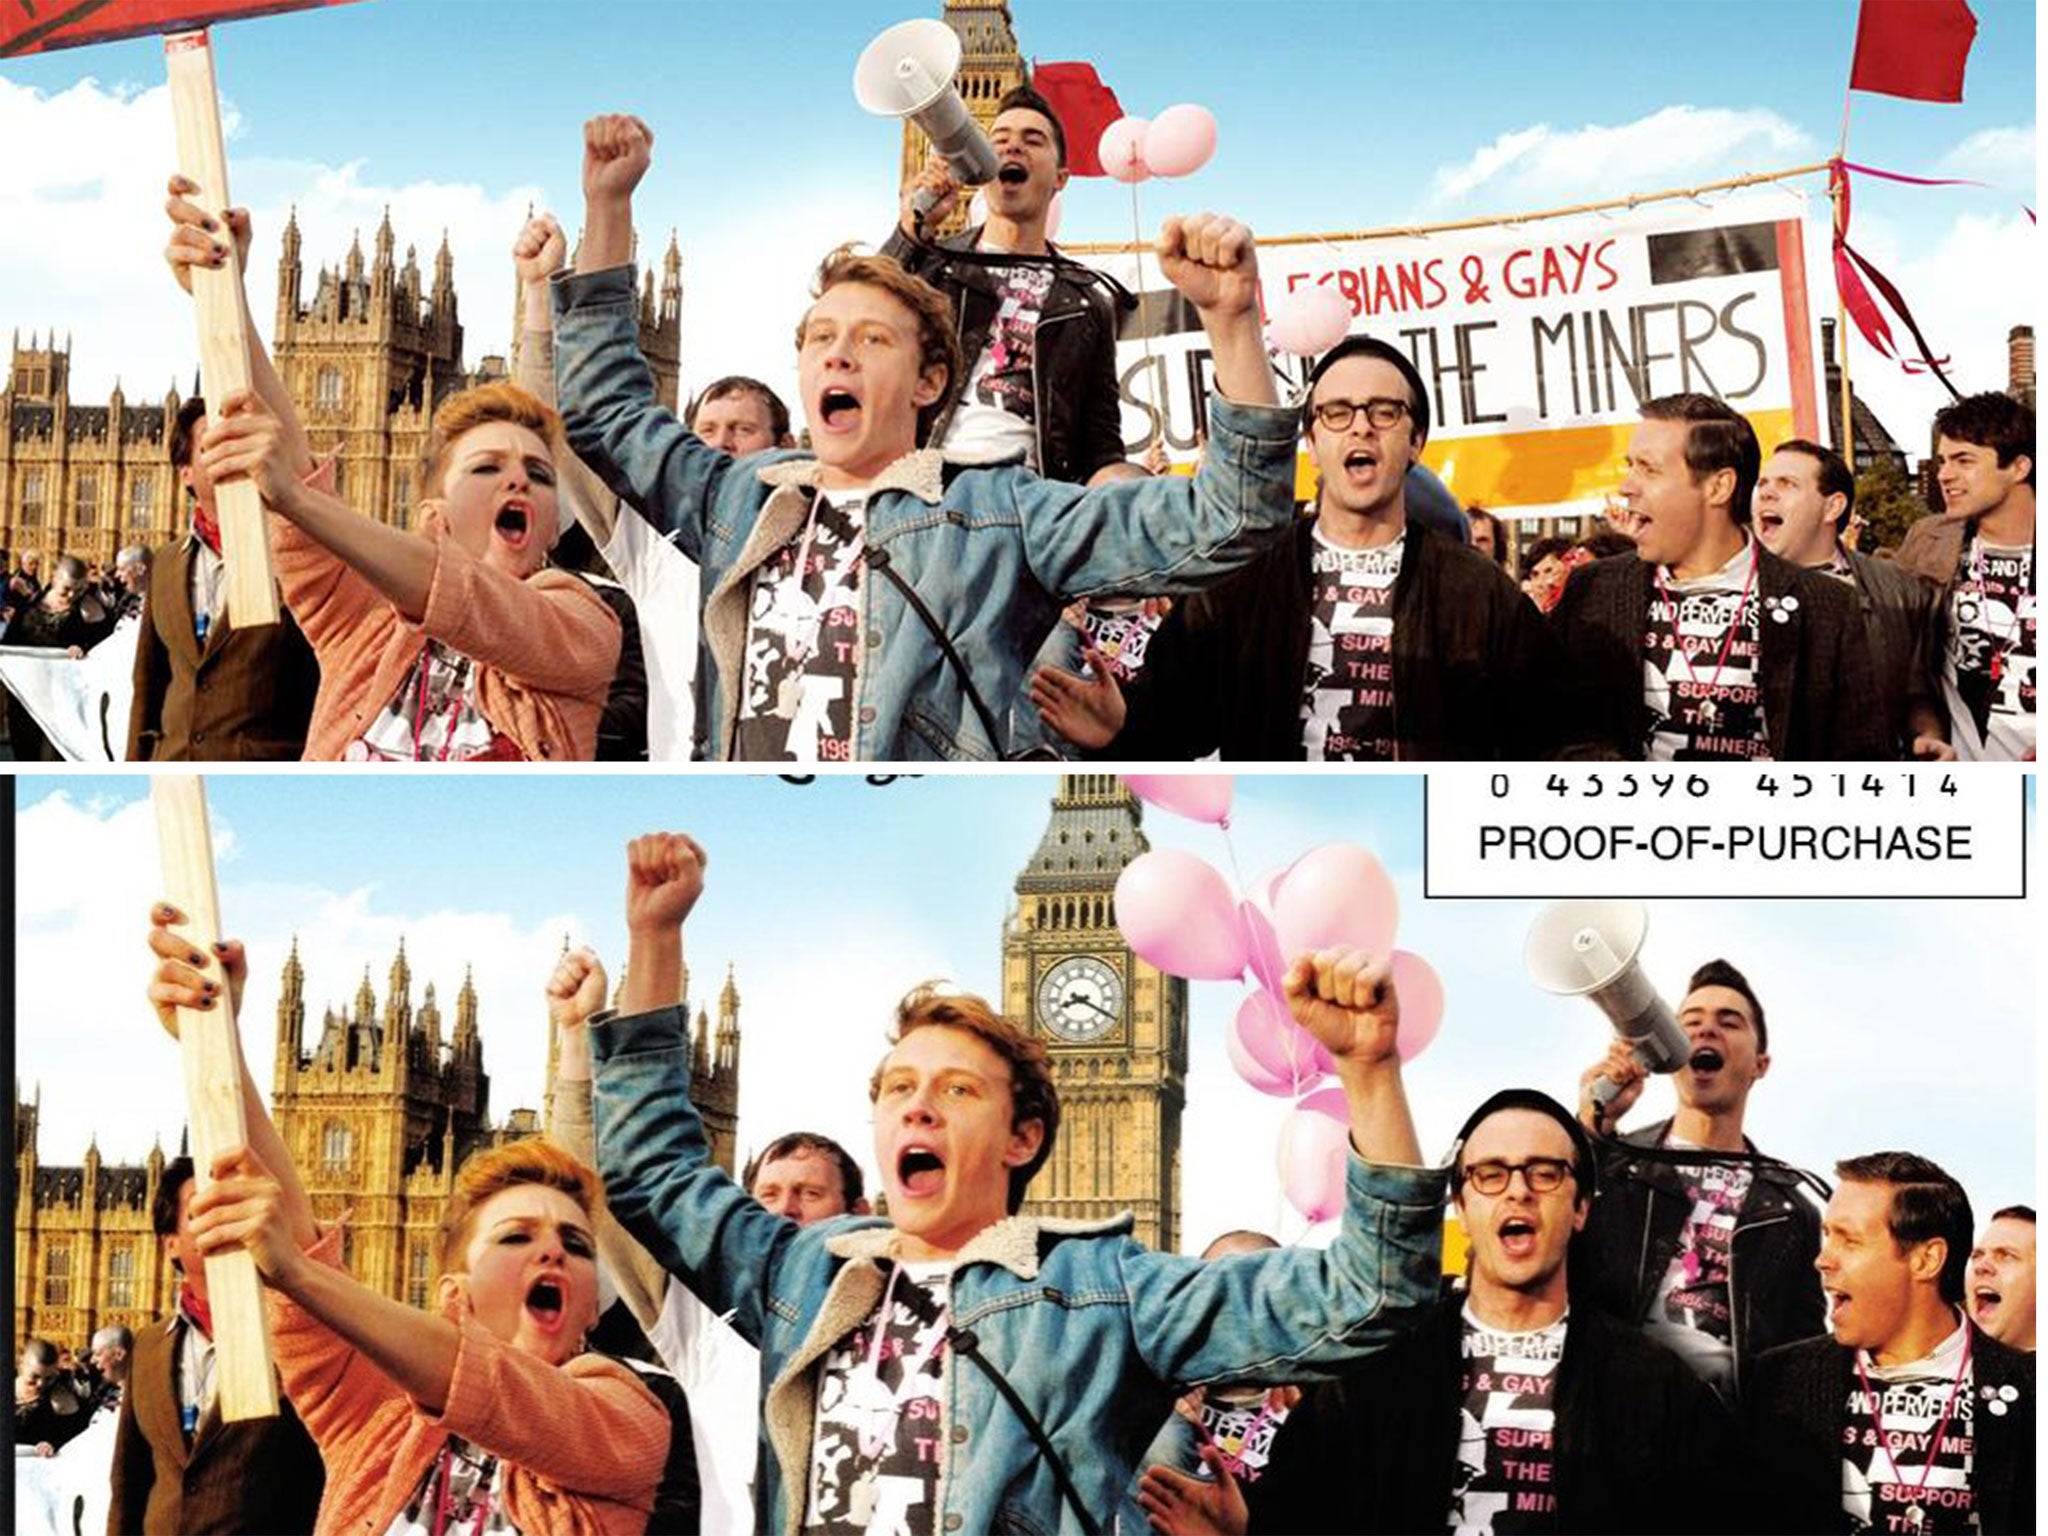 UK promotional material, top, shows the banner reading ‘Lesbians & gays support the miners’. The back of the US DVD box, bottom, does not